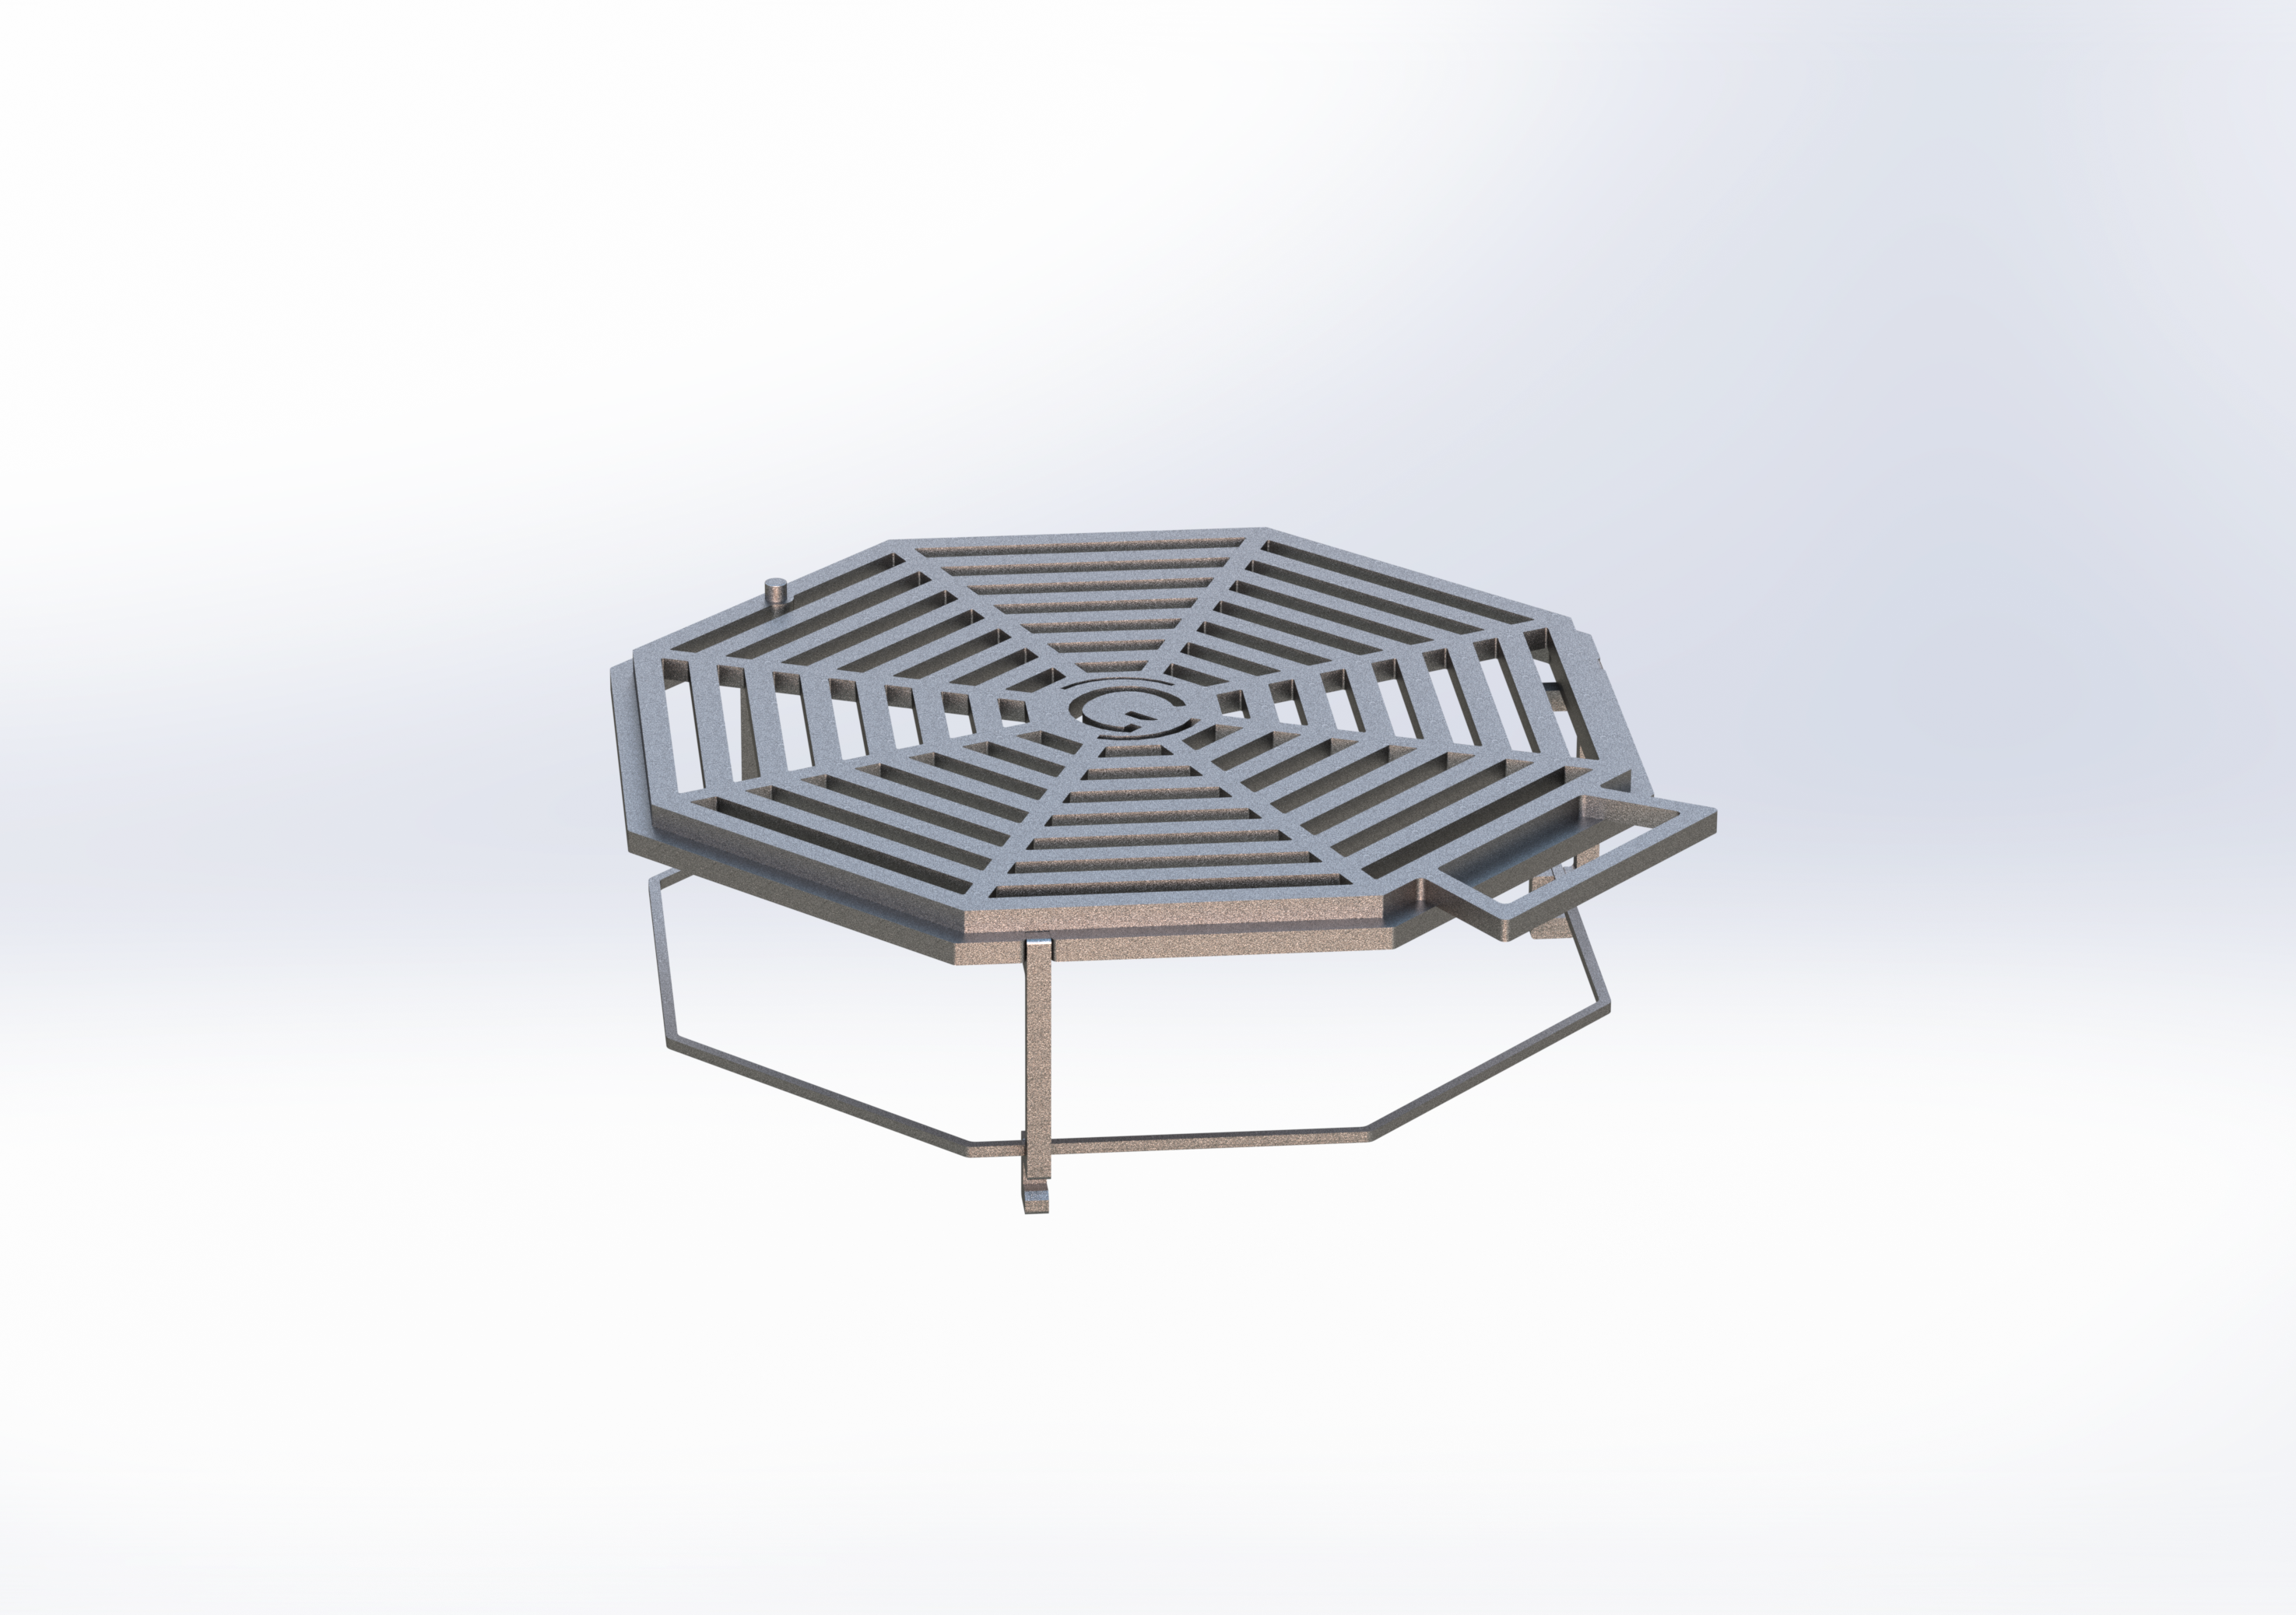 Grille-2